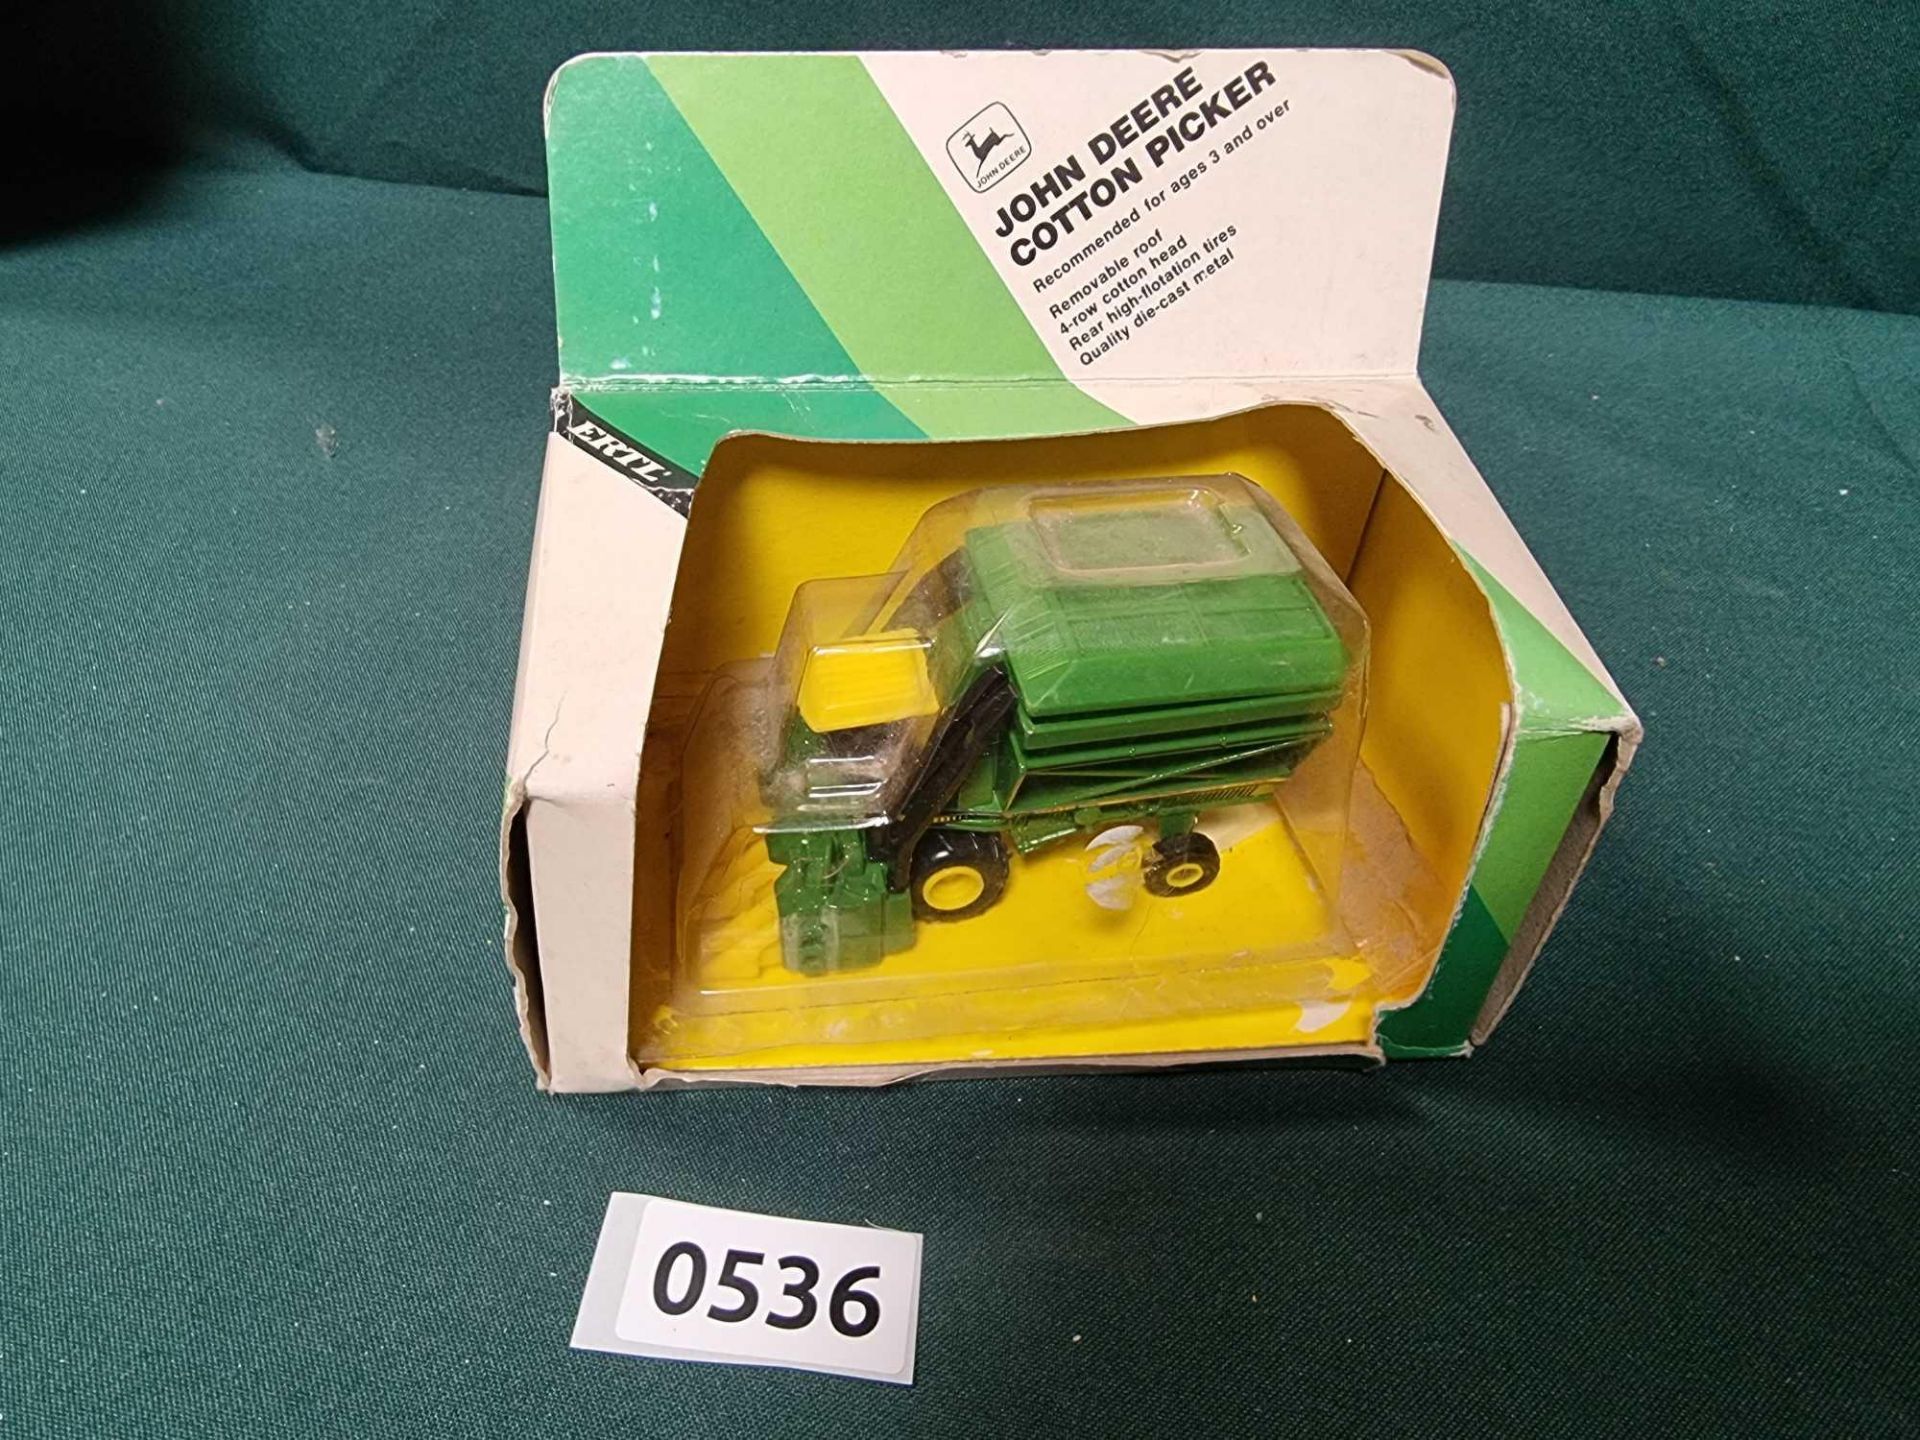 ERTL # 100-1HEO John Deere Cotton Picker 1/80th Scale Diecast Model A Stunning Diecast Of The Famous